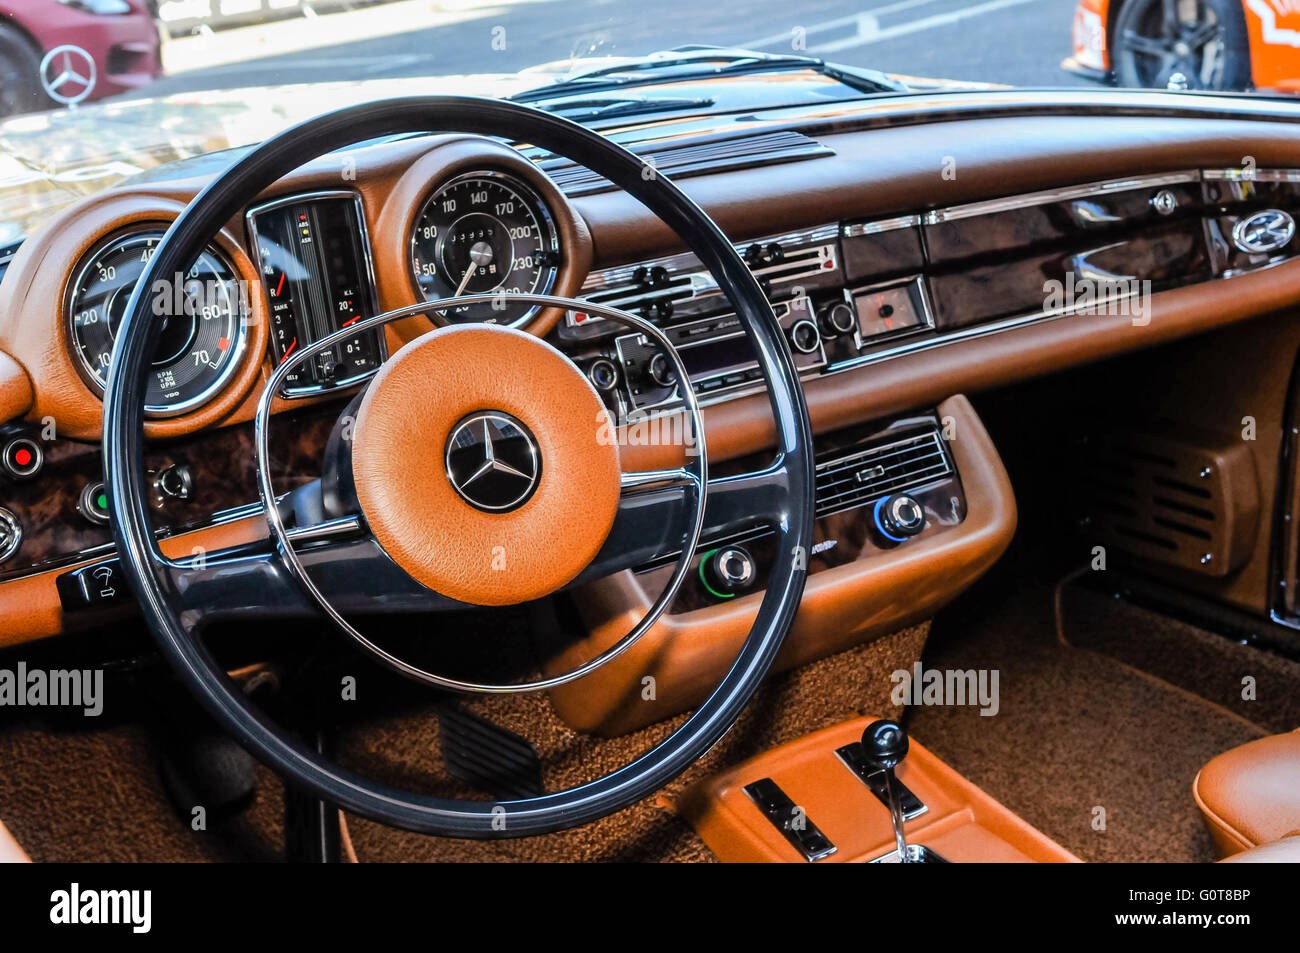 Interior of a restored 1970 Mercedes Benz 280 SL Coupe Stock Photo - Alamy